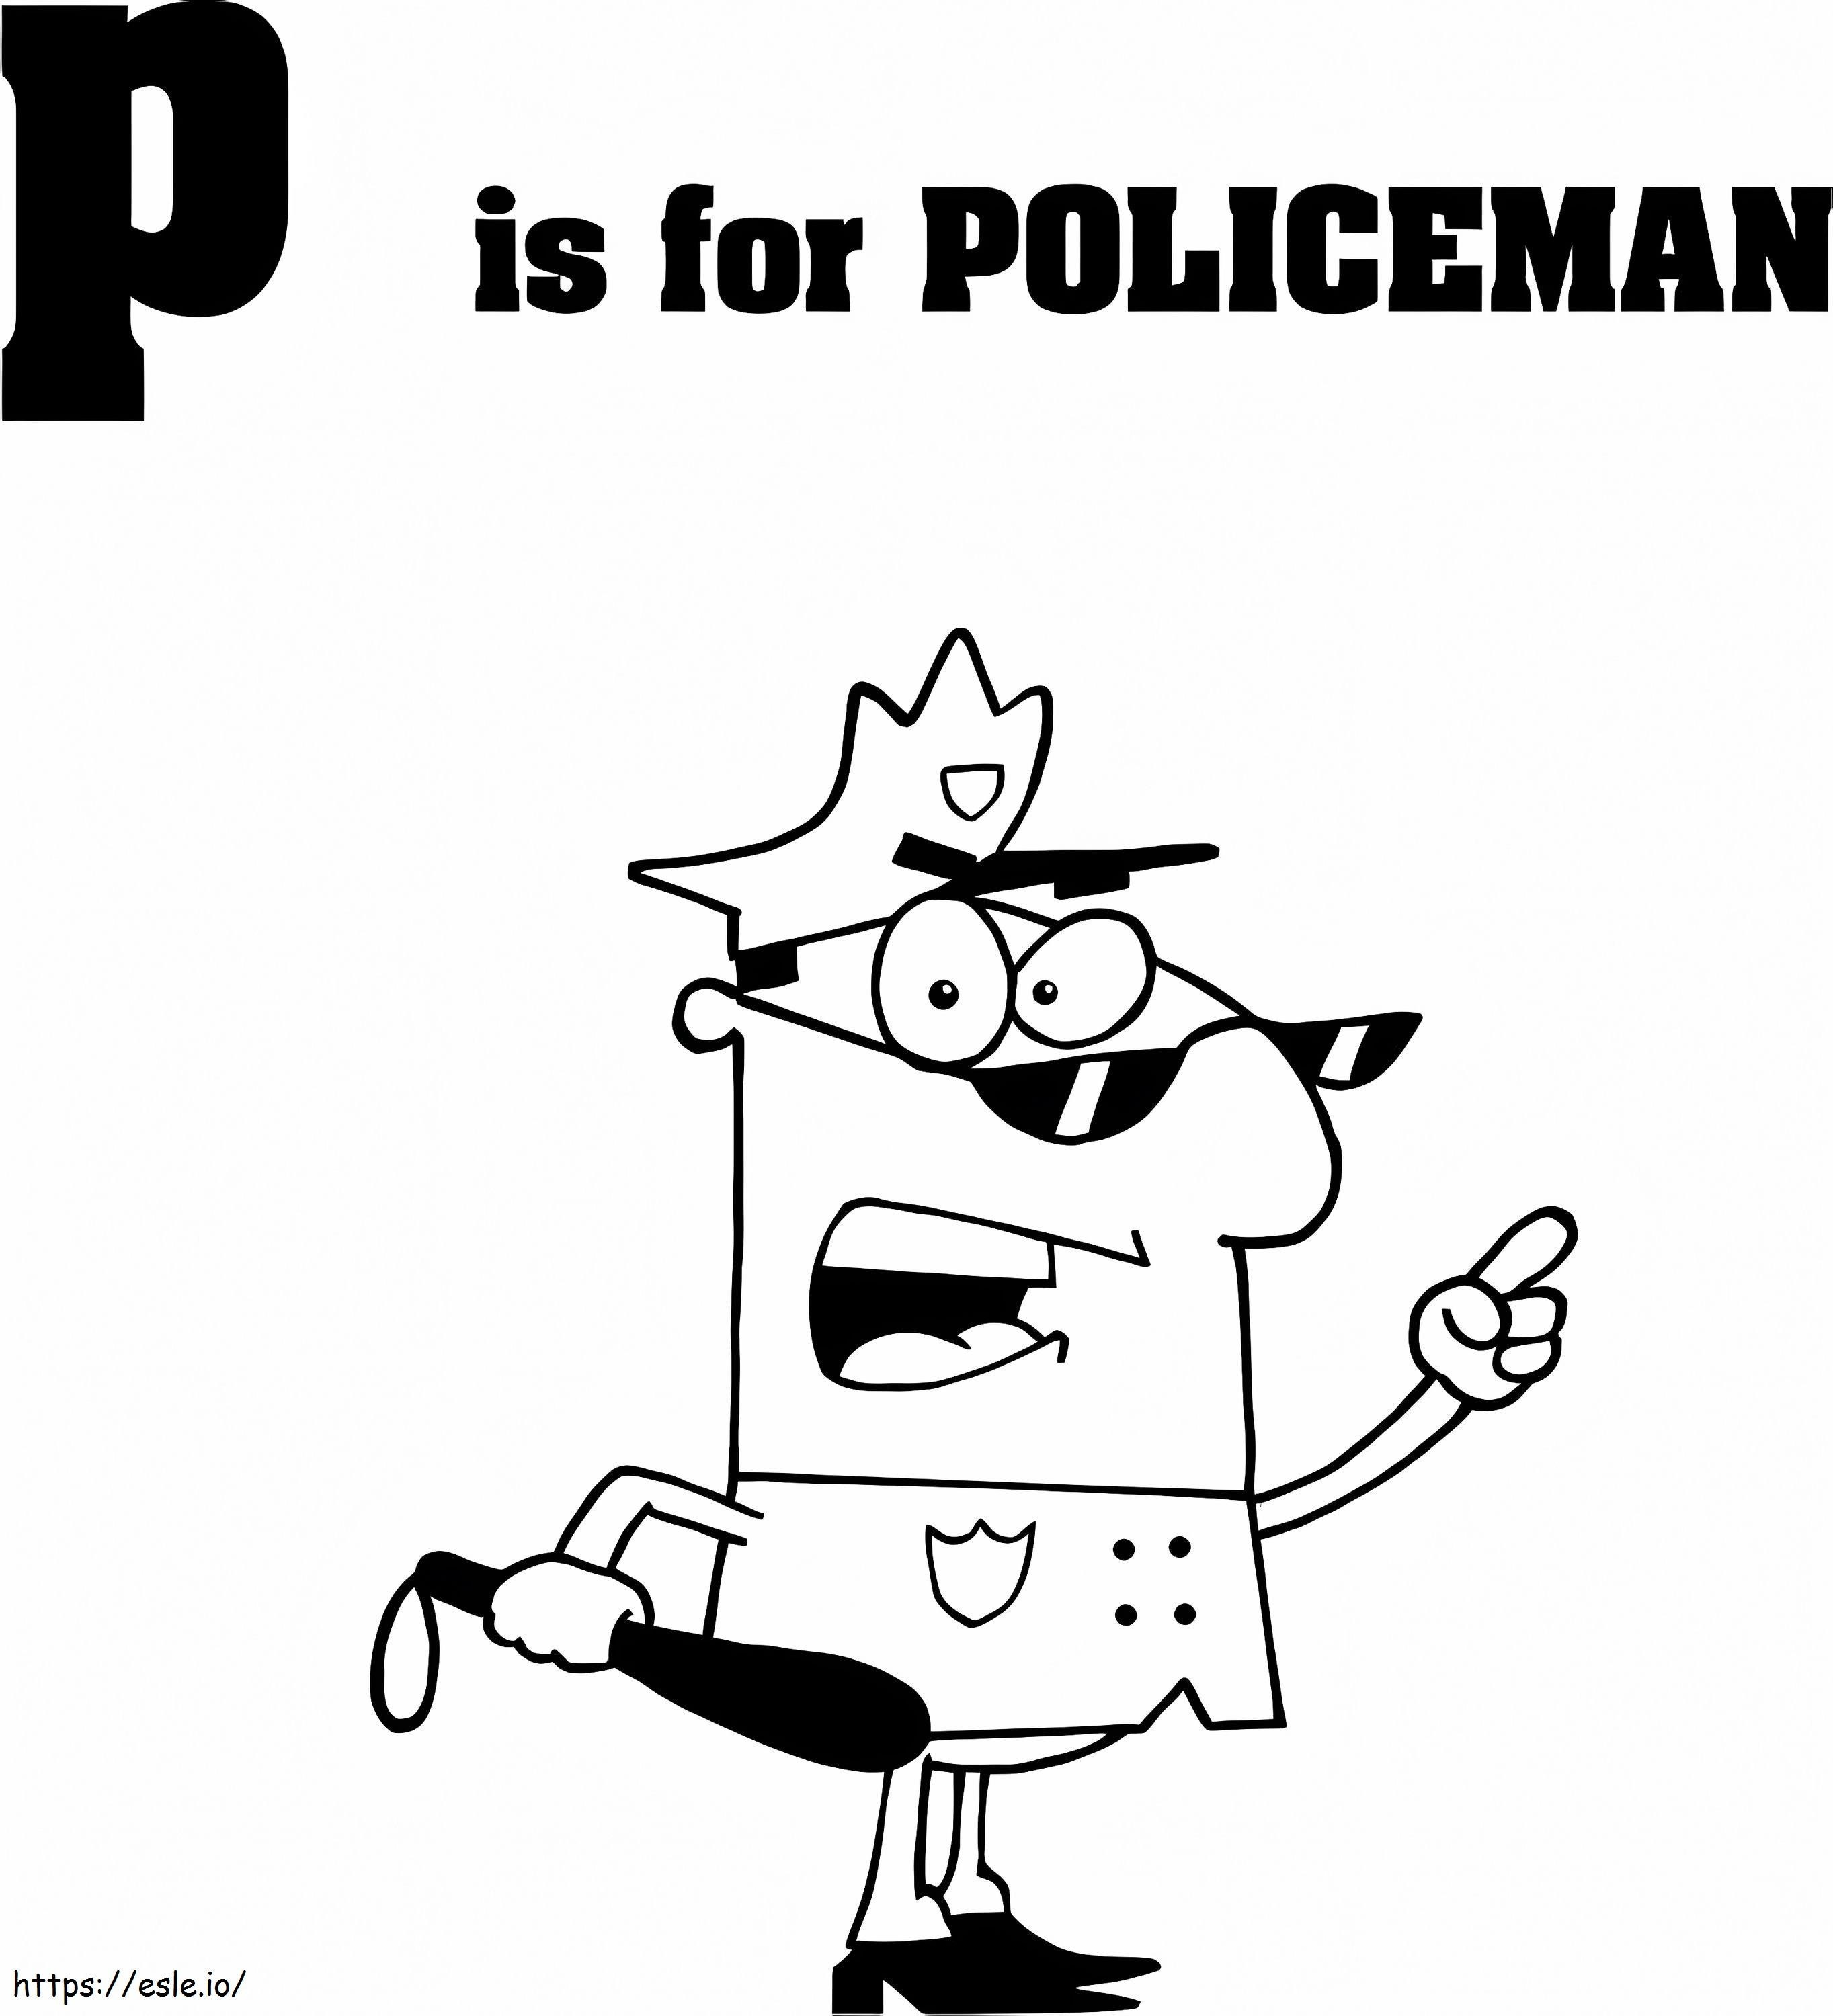 Policeman Letter P coloring page